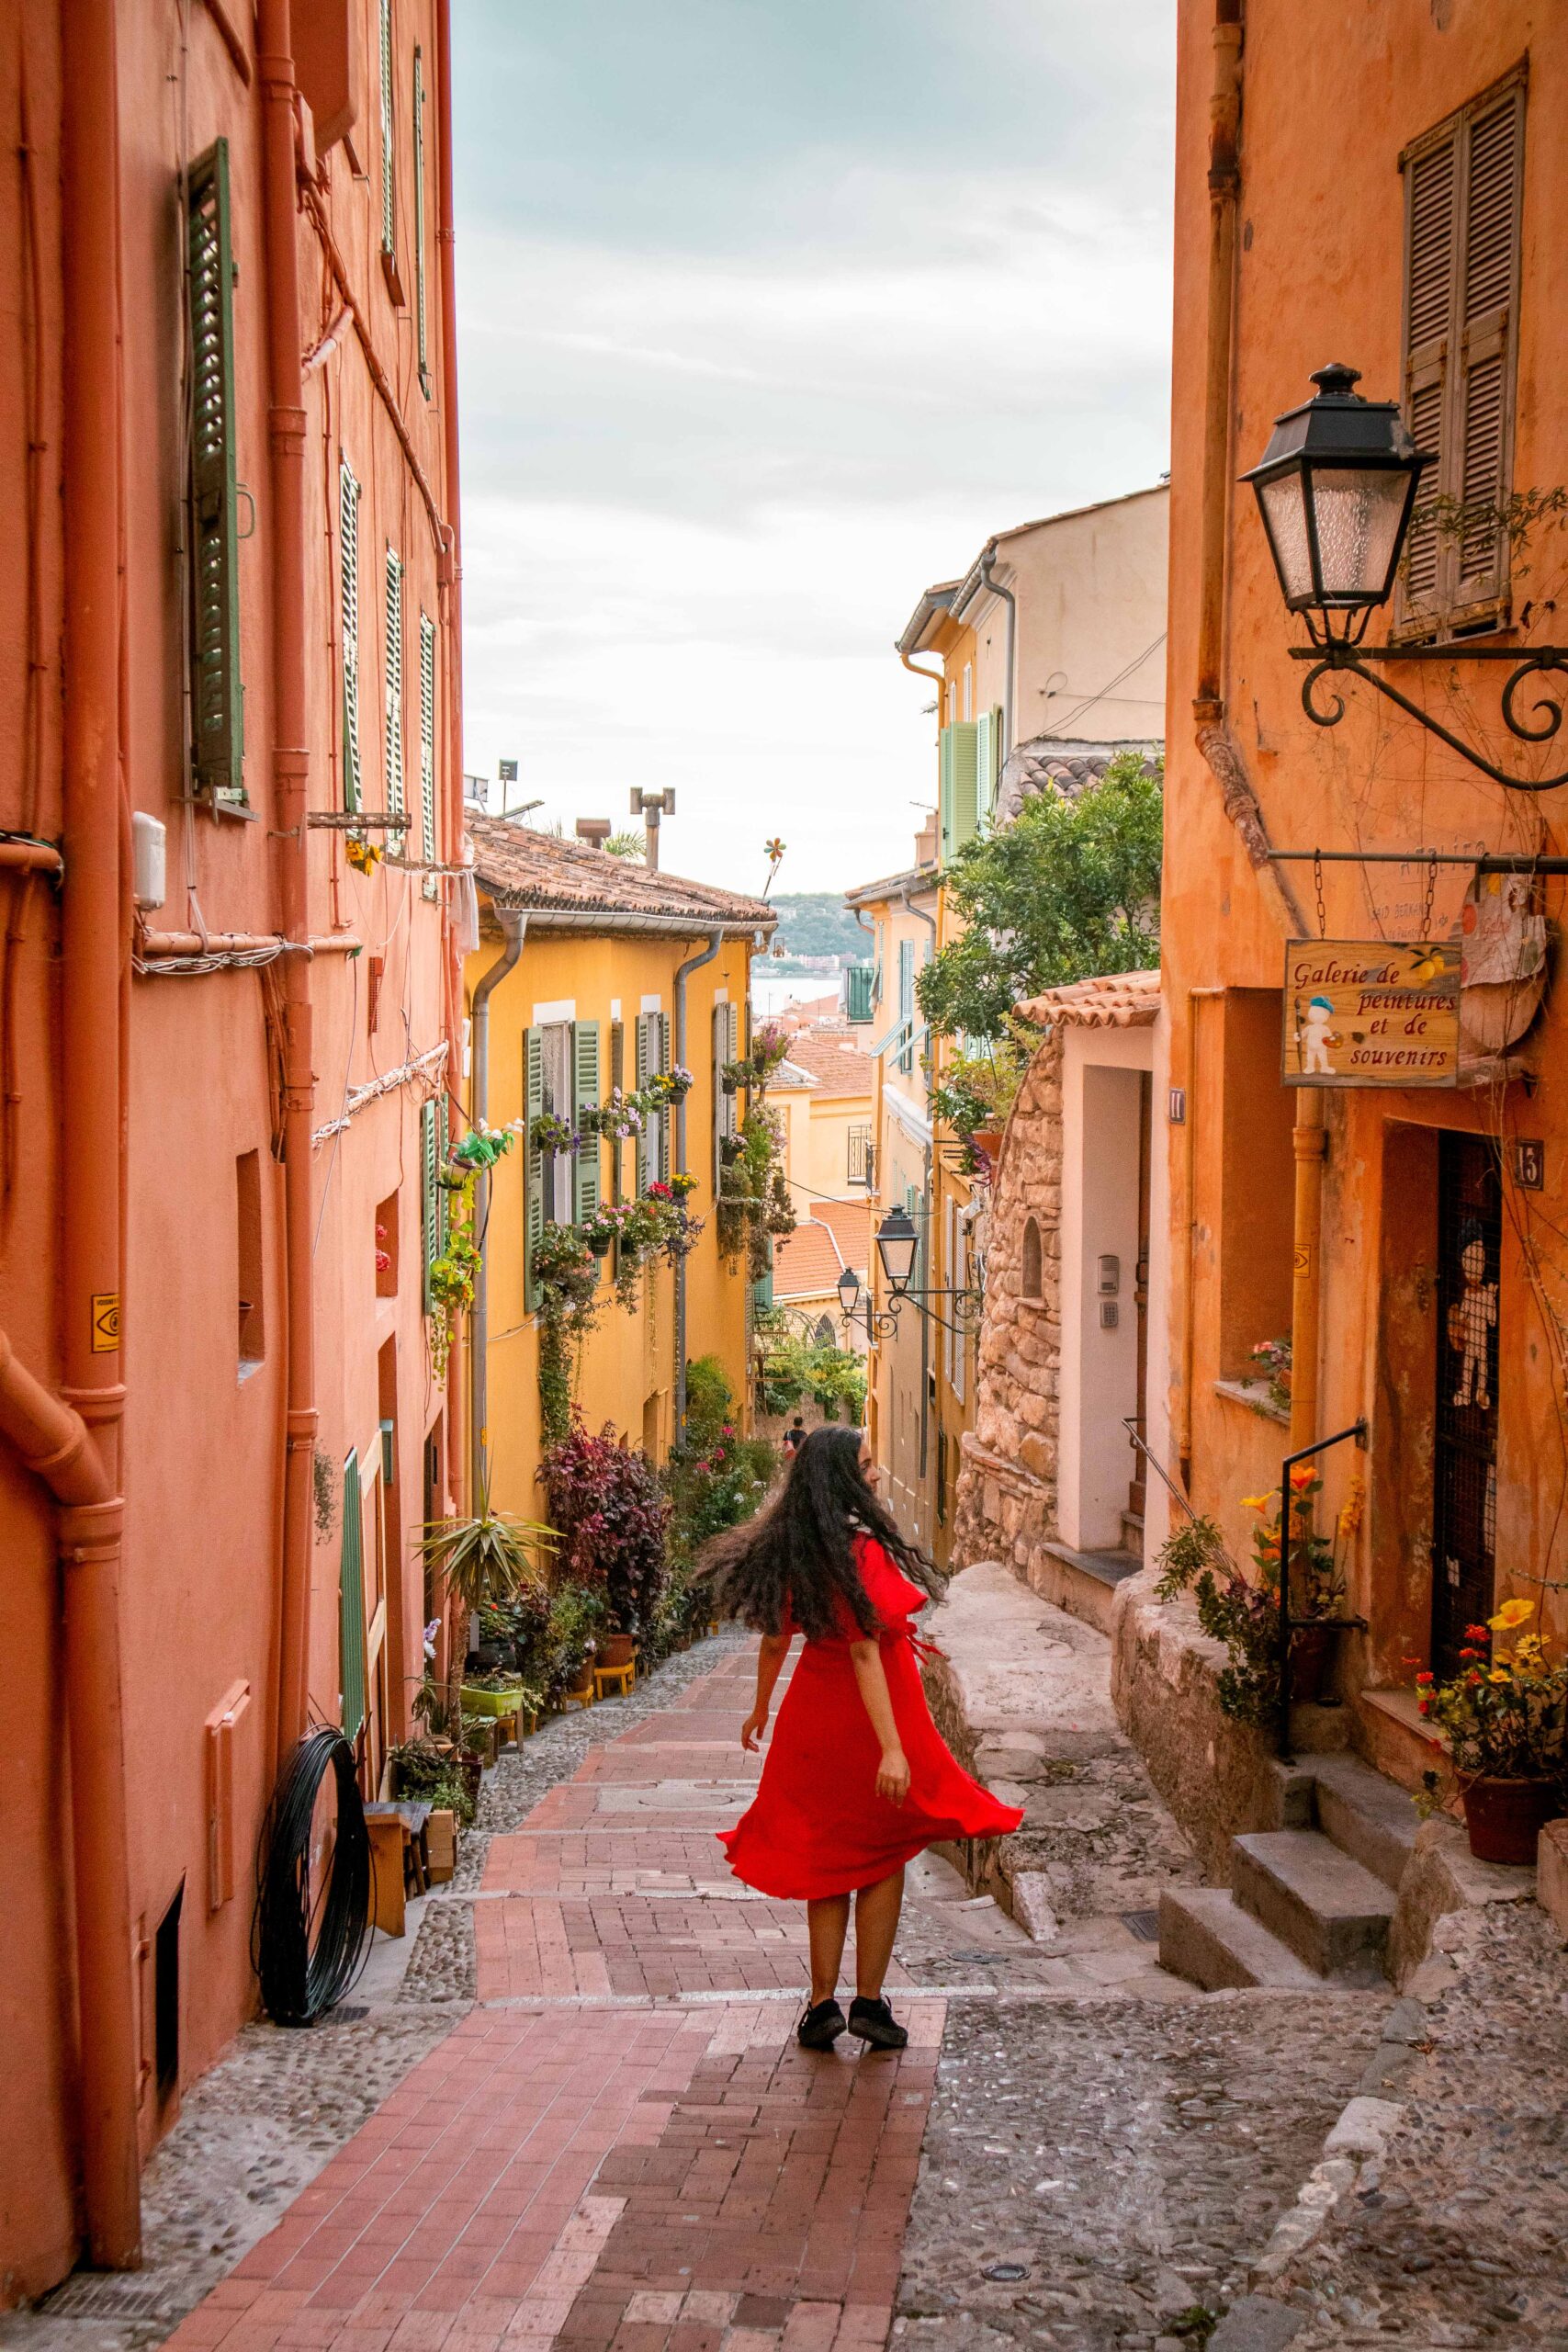 Woman wearing a red dress twirling in a colourful street ("Rue du Palmier") in front of the Saïd Berkane art gallery in the Old Town of Menton, France